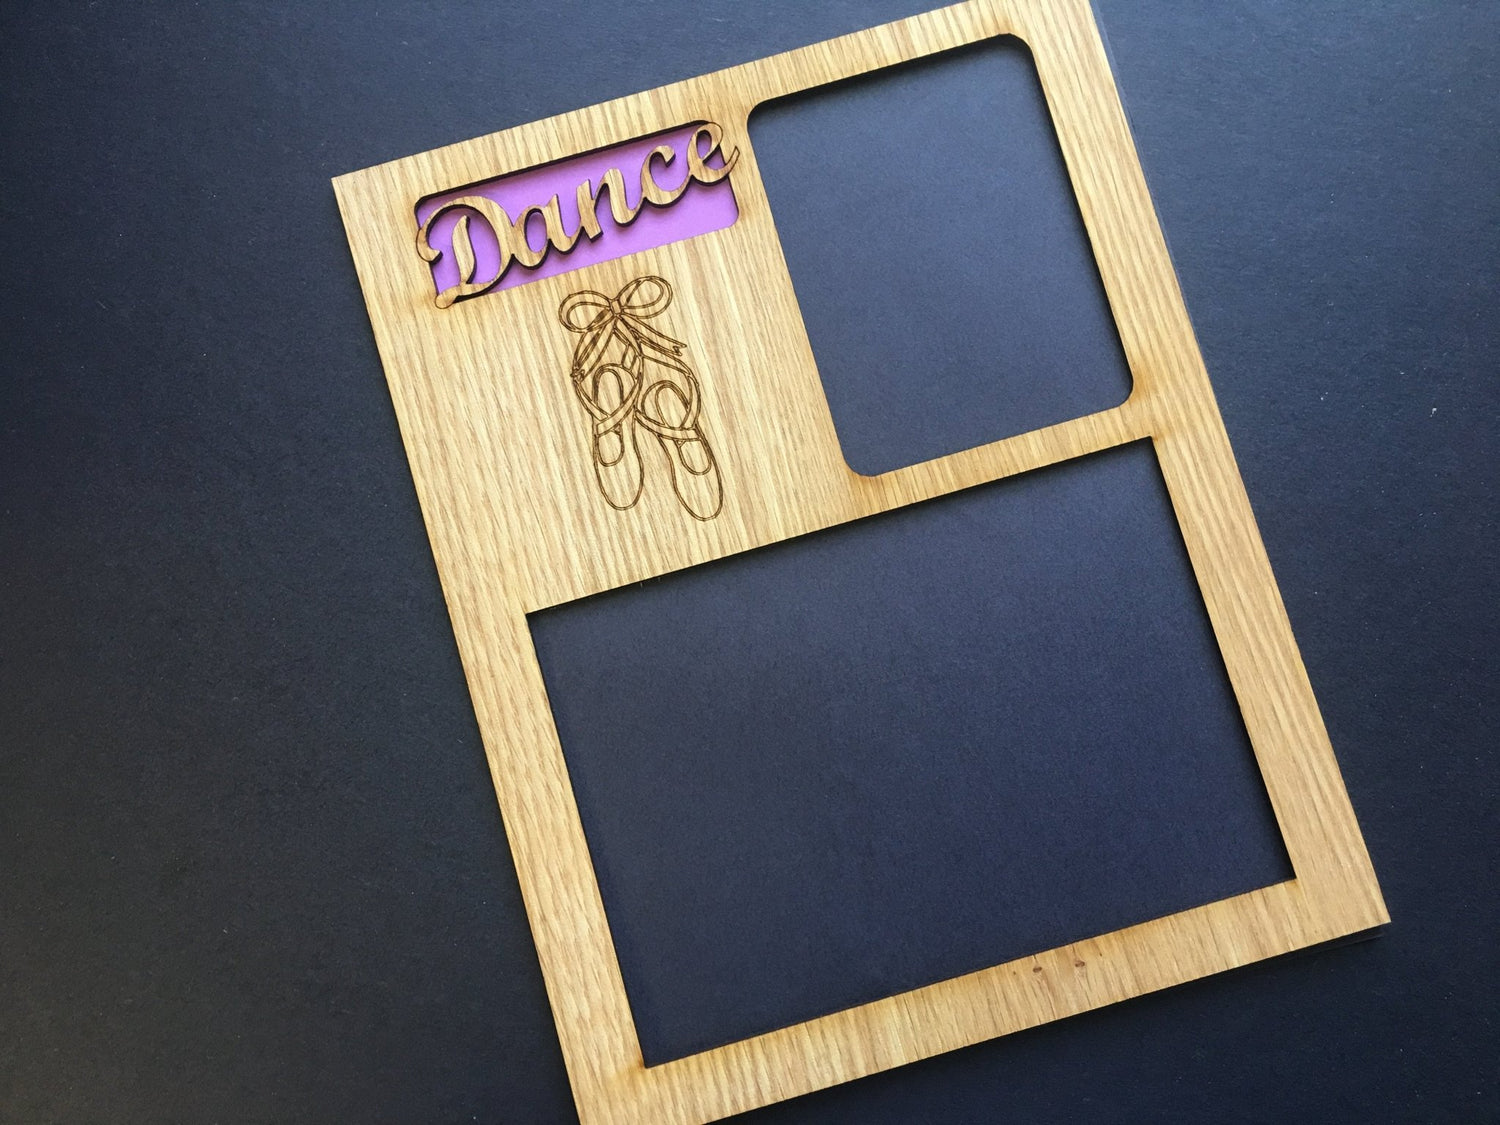 Dance Picture Frame - Dance Picture Frame - Legacy Images - Picture Frames - Legacy Images - Picture Frames